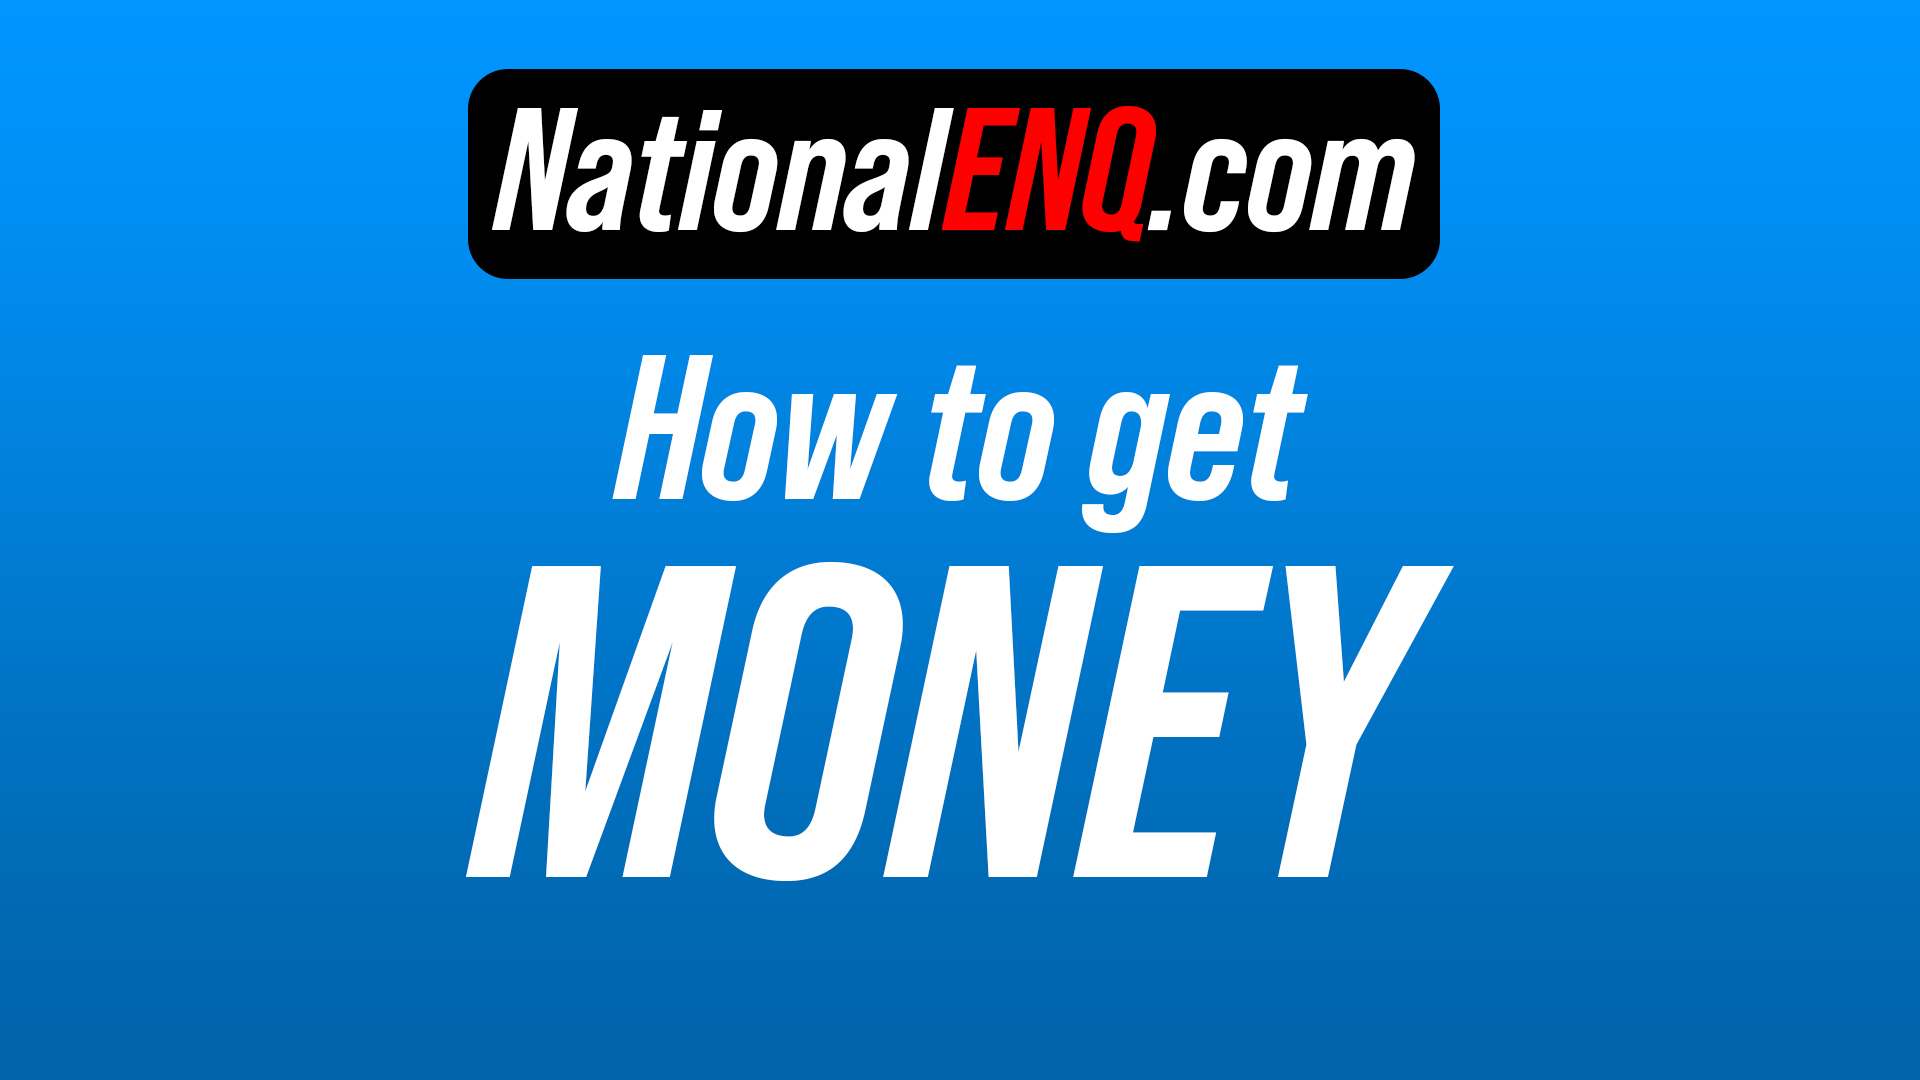 National ENQ Guide to Angel Investors, Venture Capital Firms, Money Lenders. Where to Find a Good Loan & Funding from Business Angels